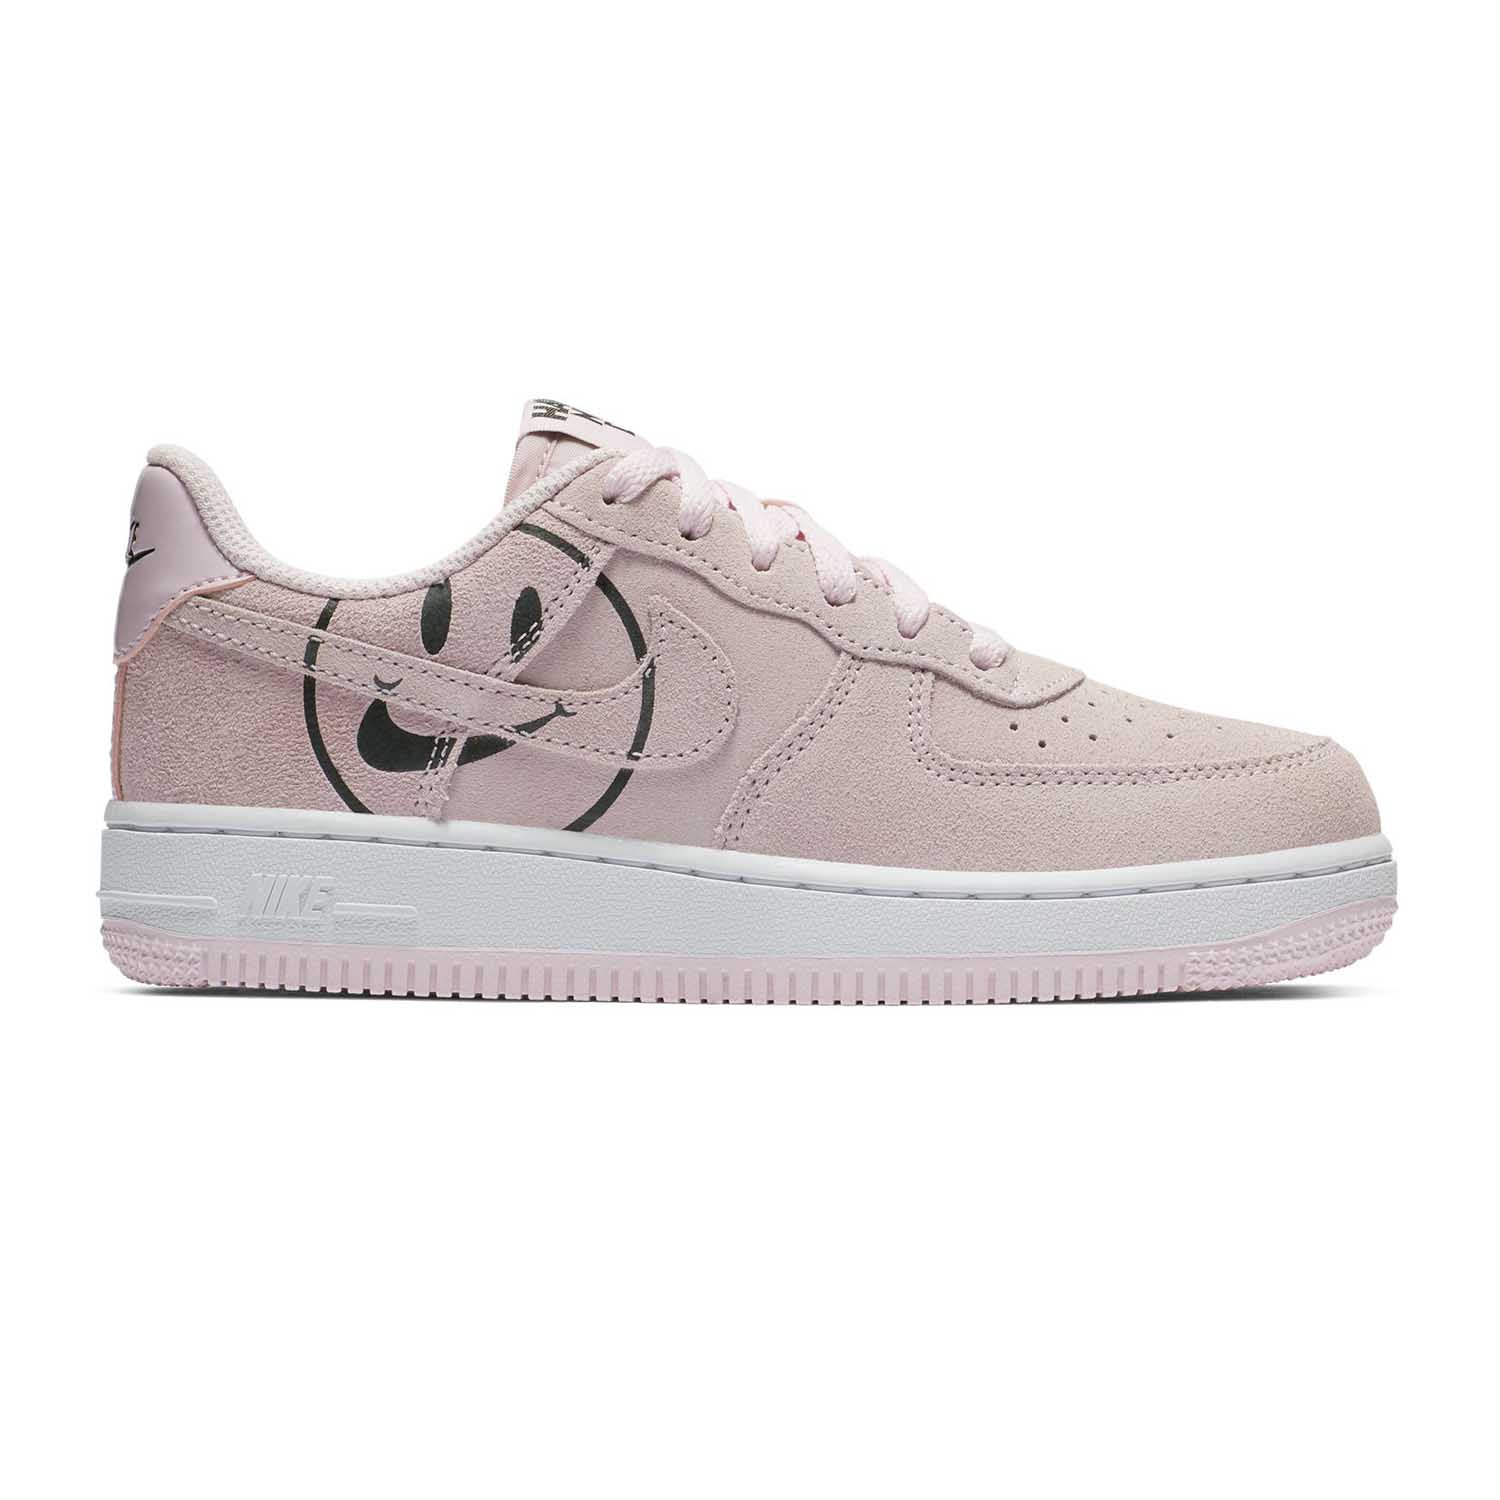 Nike Air Force 1 ‘Have A Nice Day’ LV8 2 PS ( BQ8274-600 )